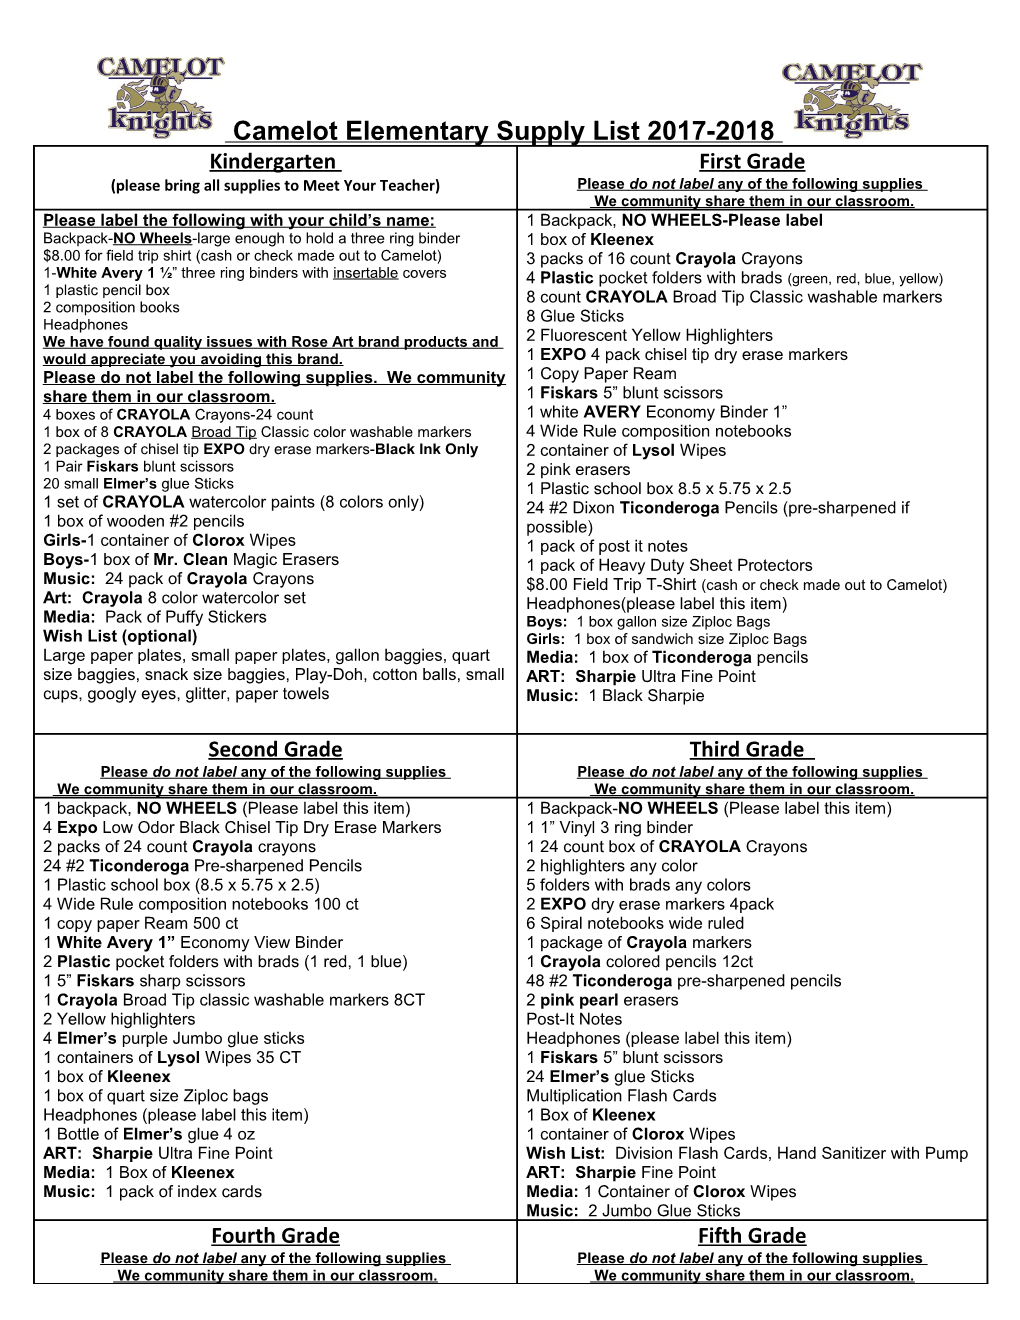 Camelot Elementary Supply List 2017-2018